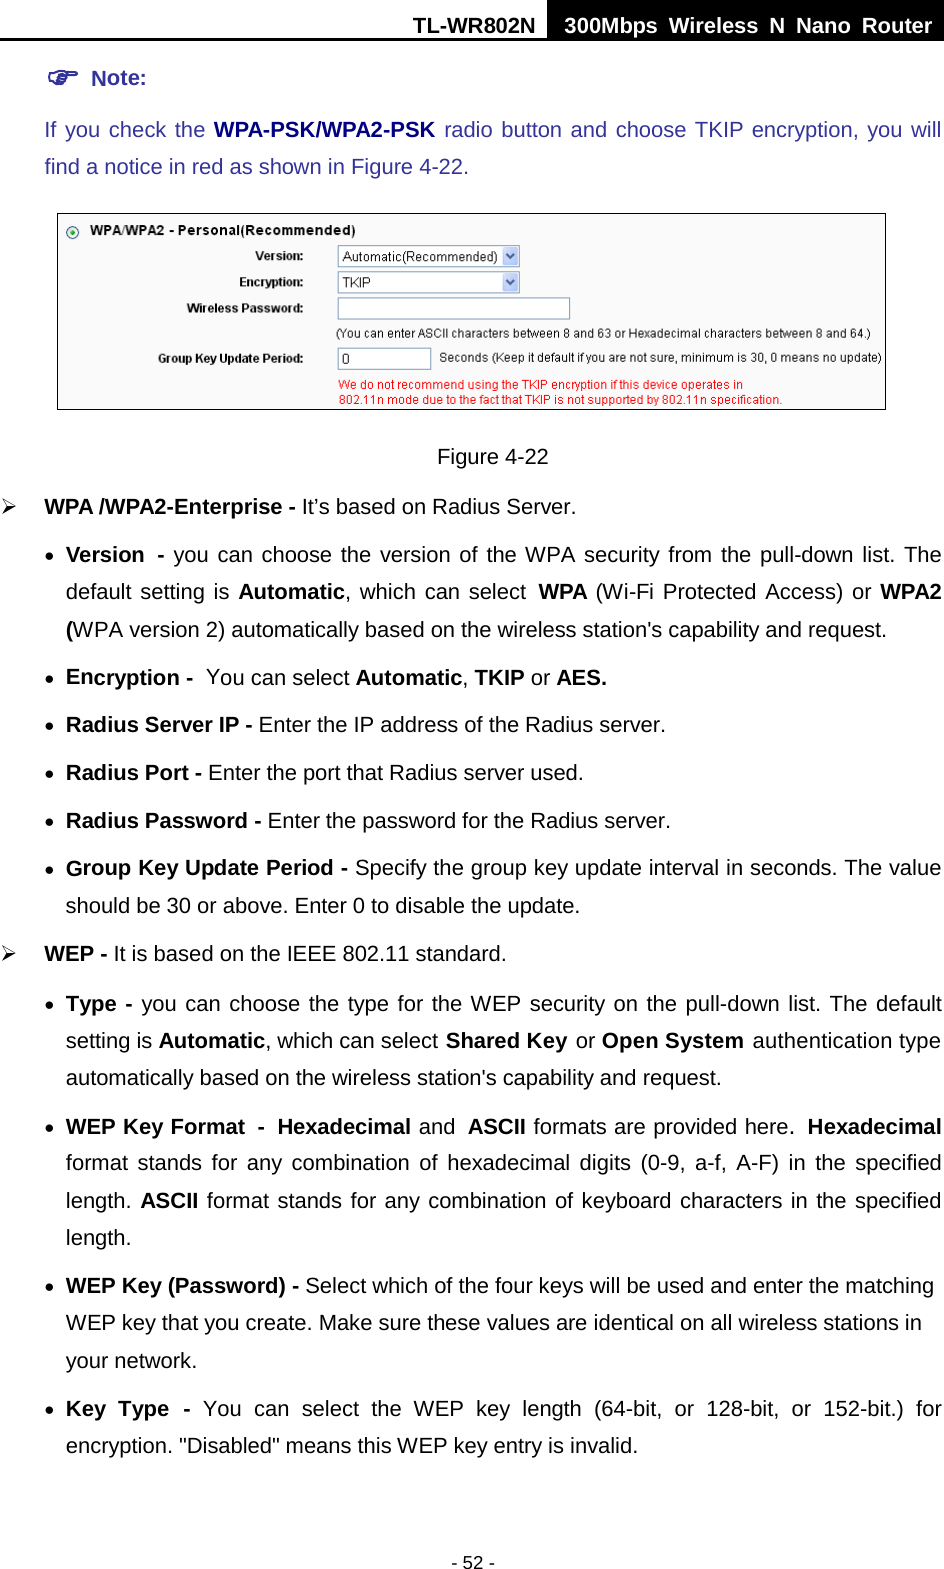 TL-WR802N  300Mbps Wireless N Nano Router   Note:   If you check the WPA-PSK/WPA2-PSK radio button and choose TKIP encryption, you will find a notice in red as shown in Figure 4-22.  Figure 4-22  WPA /WPA2-Enterprise - It’s based on Radius Server. • Version - you can choose the version of the WPA security from the pull-down list. The default setting is Automatic, which can select WPA (Wi-Fi Protected Access) or WPA2 (WPA version 2) automatically based on the wireless station&apos;s capability and request. • Encryption - You can select Automatic, TKIP or AES. • Radius Server IP - Enter the IP address of the Radius server. • Radius Port - Enter the port that Radius server used. • Radius Password - Enter the password for the Radius server. • Group Key Update Period - Specify the group key update interval in seconds. The value should be 30 or above. Enter 0 to disable the update.  WEP - It is based on the IEEE 802.11 standard.   • Type - you can choose the type for the WEP security on the pull-down list. The default setting is Automatic, which can select Shared Key or Open System authentication type automatically based on the wireless station&apos;s capability and request. • WEP Key Format - Hexadecimal and ASCII formats are provided here. Hexadecimal format stands for any combination of hexadecimal digits (0-9, a-f, A-F) in the specified length. ASCII format stands for any combination of keyboard characters in the specified length.   • WEP Key (Password) - Select which of the four keys will be used and enter the matching WEP key that you create. Make sure these values are identical on all wireless stations in your network. • Key Type - You  can select the WEP key length (64-bit, or 128-bit, or 152-bit.) for encryption. &quot;Disabled&quot; means this WEP key entry is invalid. - 52 - 